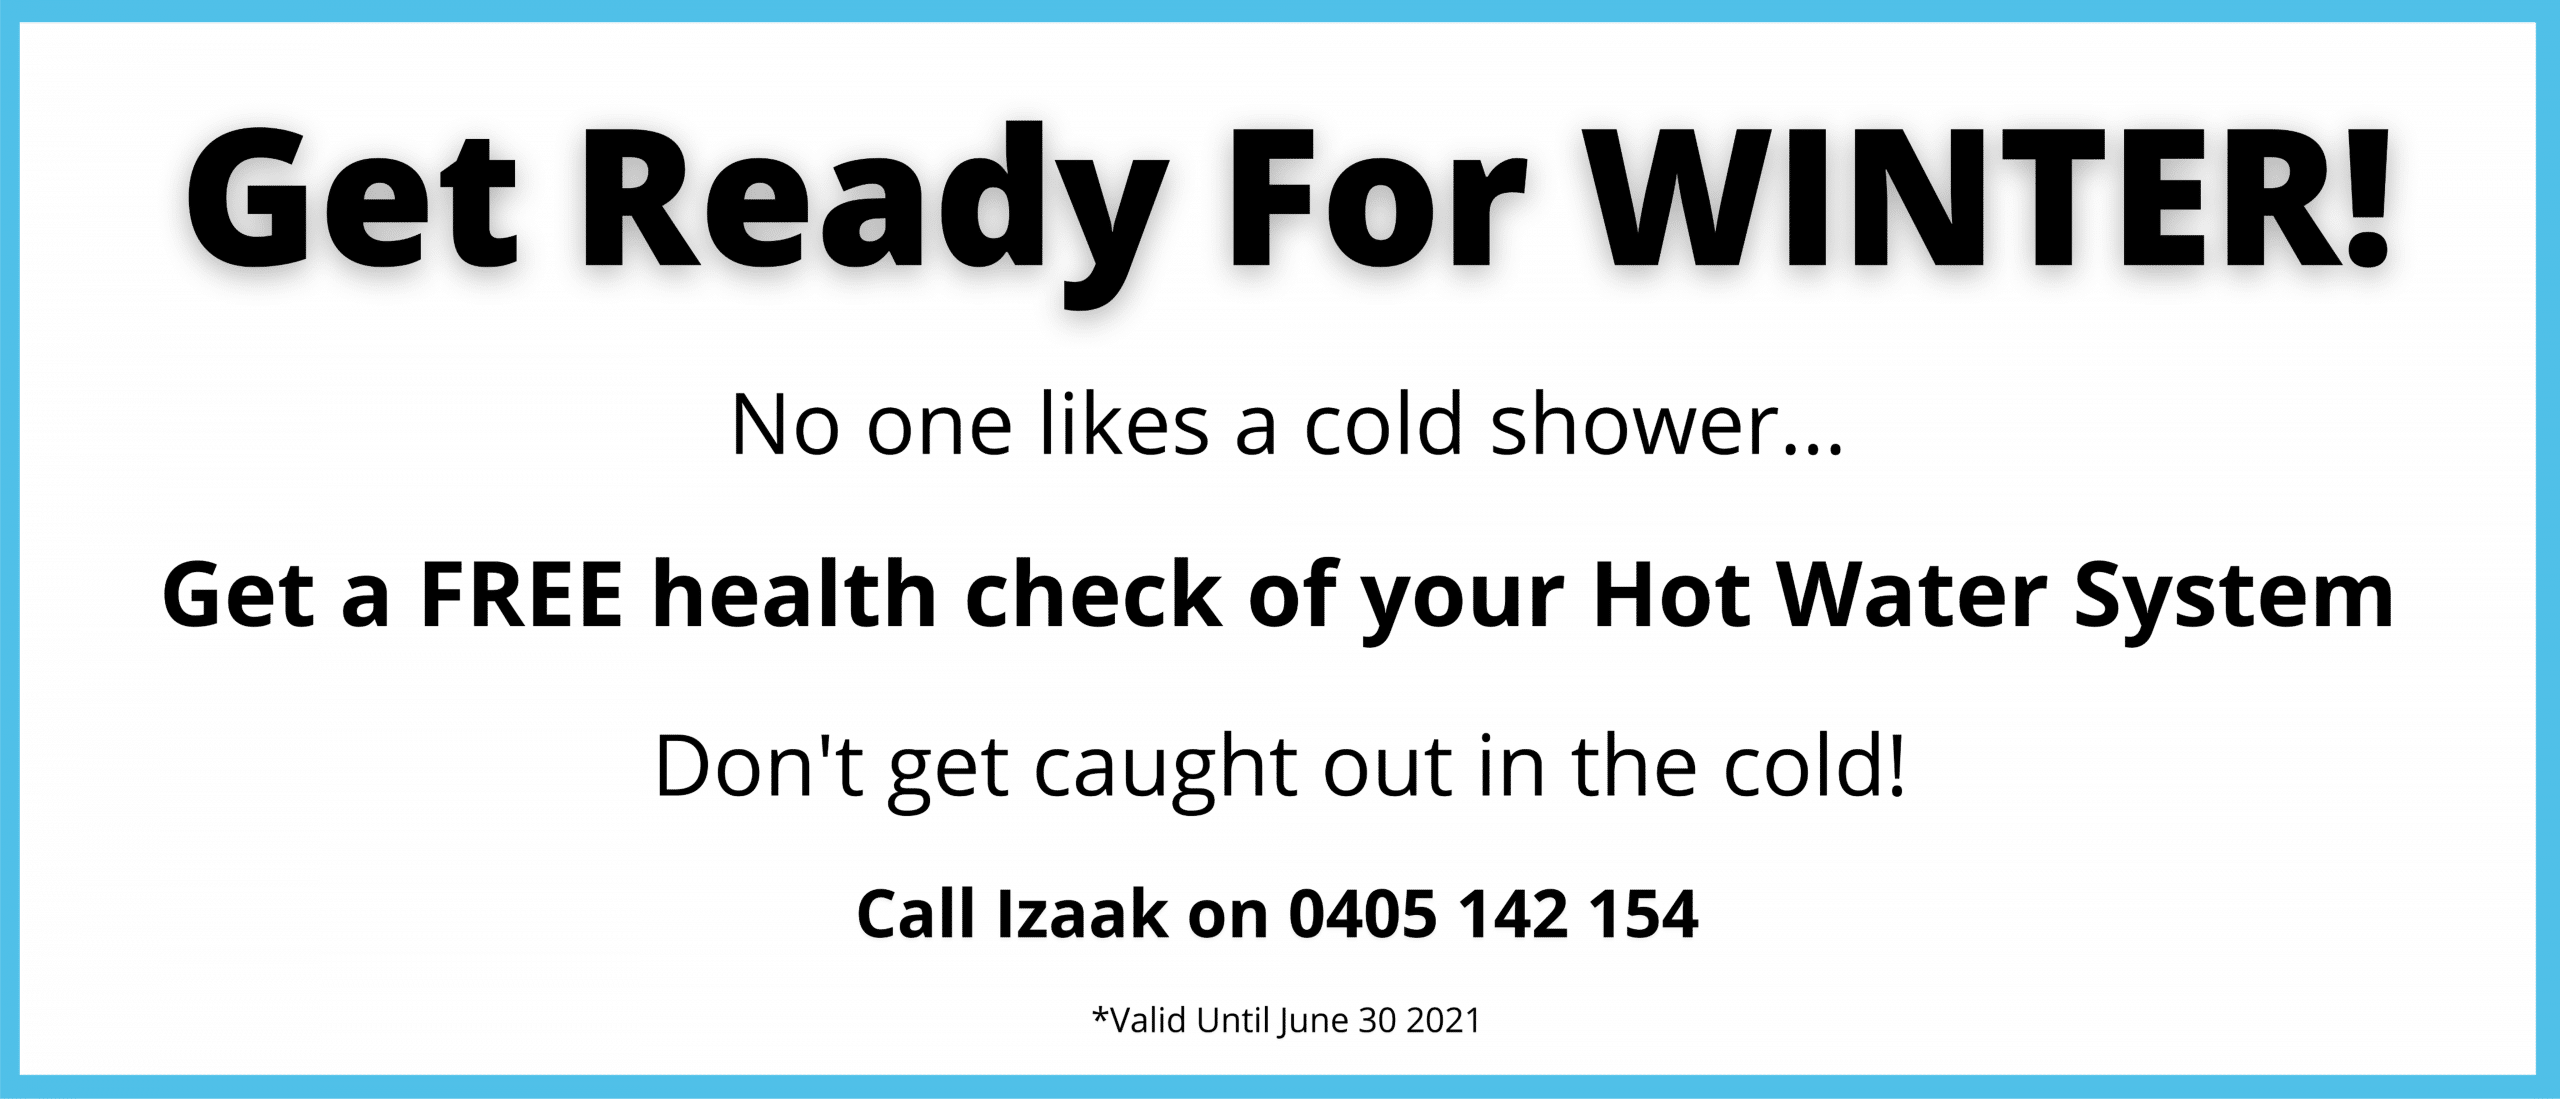 Get a FREE health check of your Hot Water System with Refined Plumbing Sunshine Coast